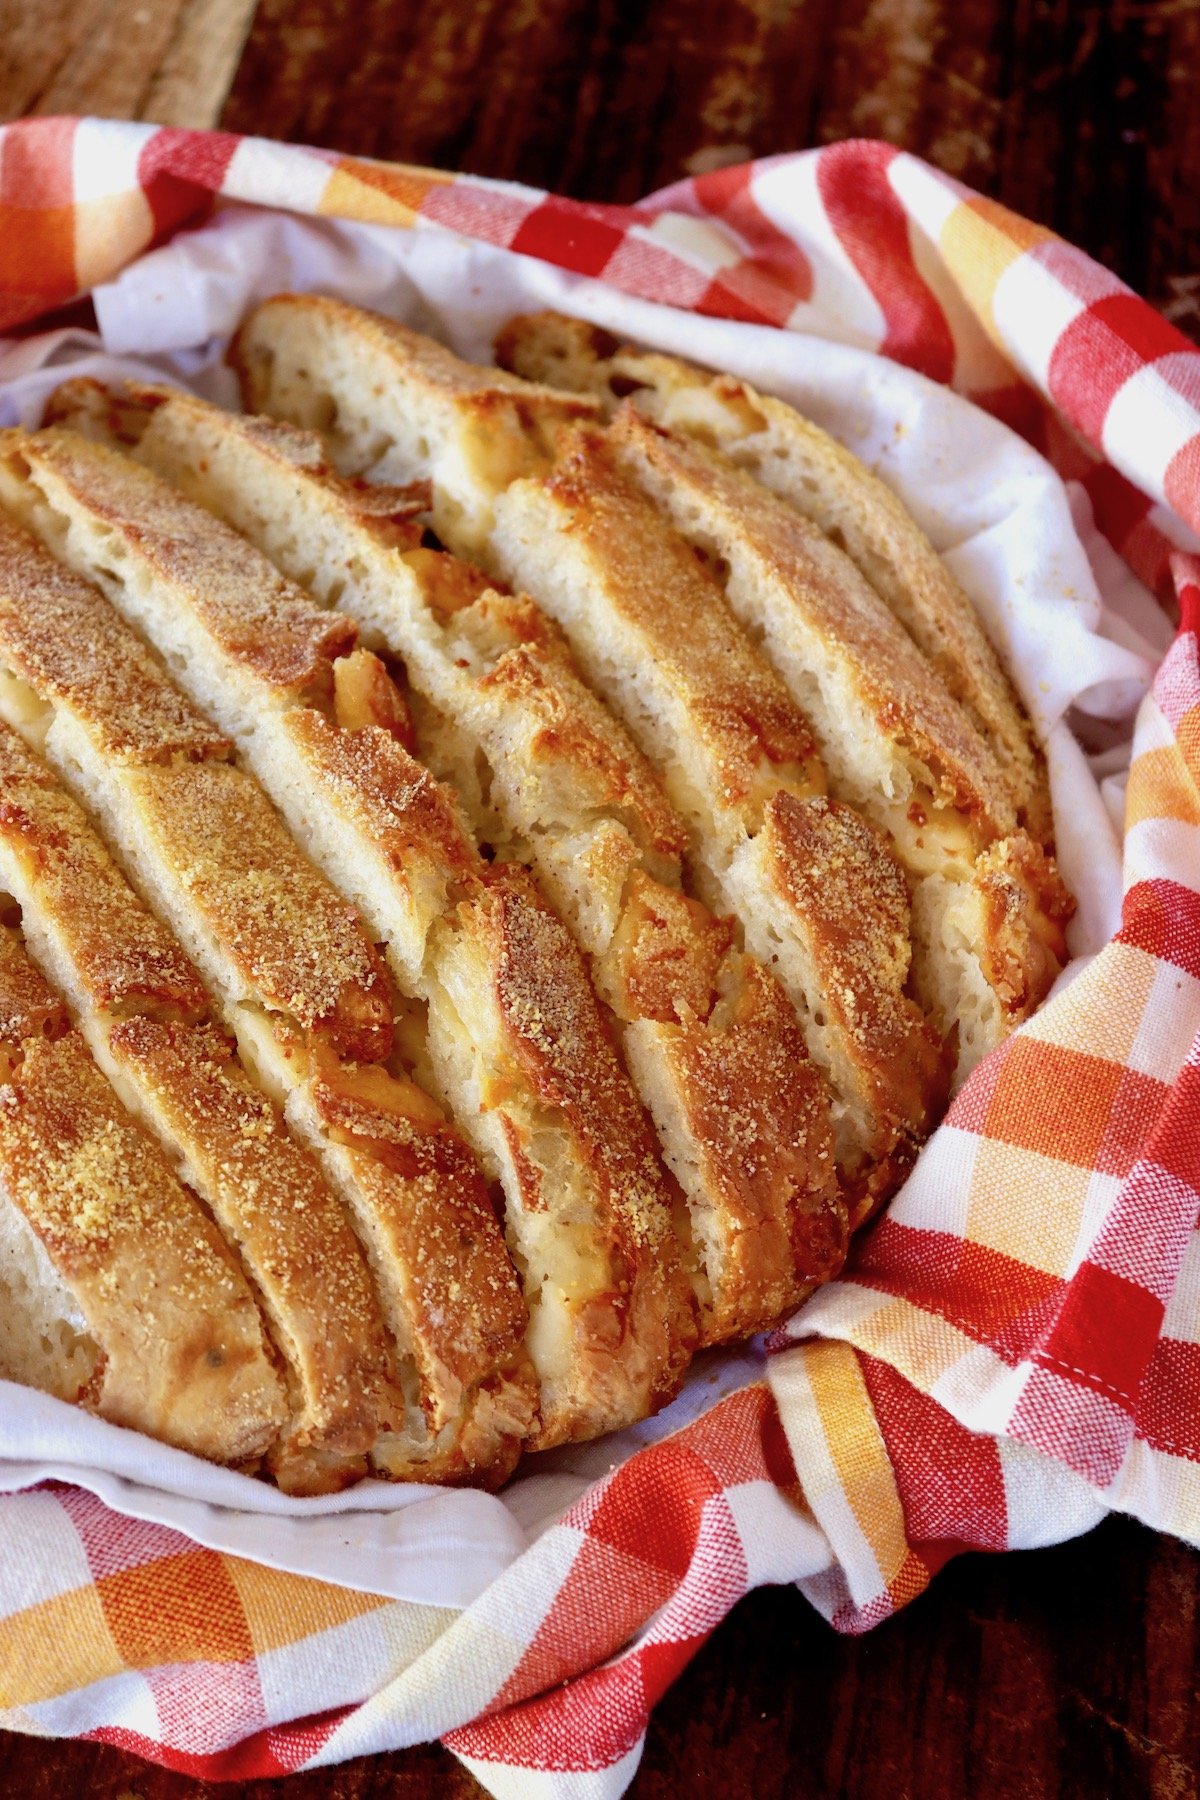 Whole, sliced golden loaf of Asiago cheese bread in a red, orange and white checkered cloth.